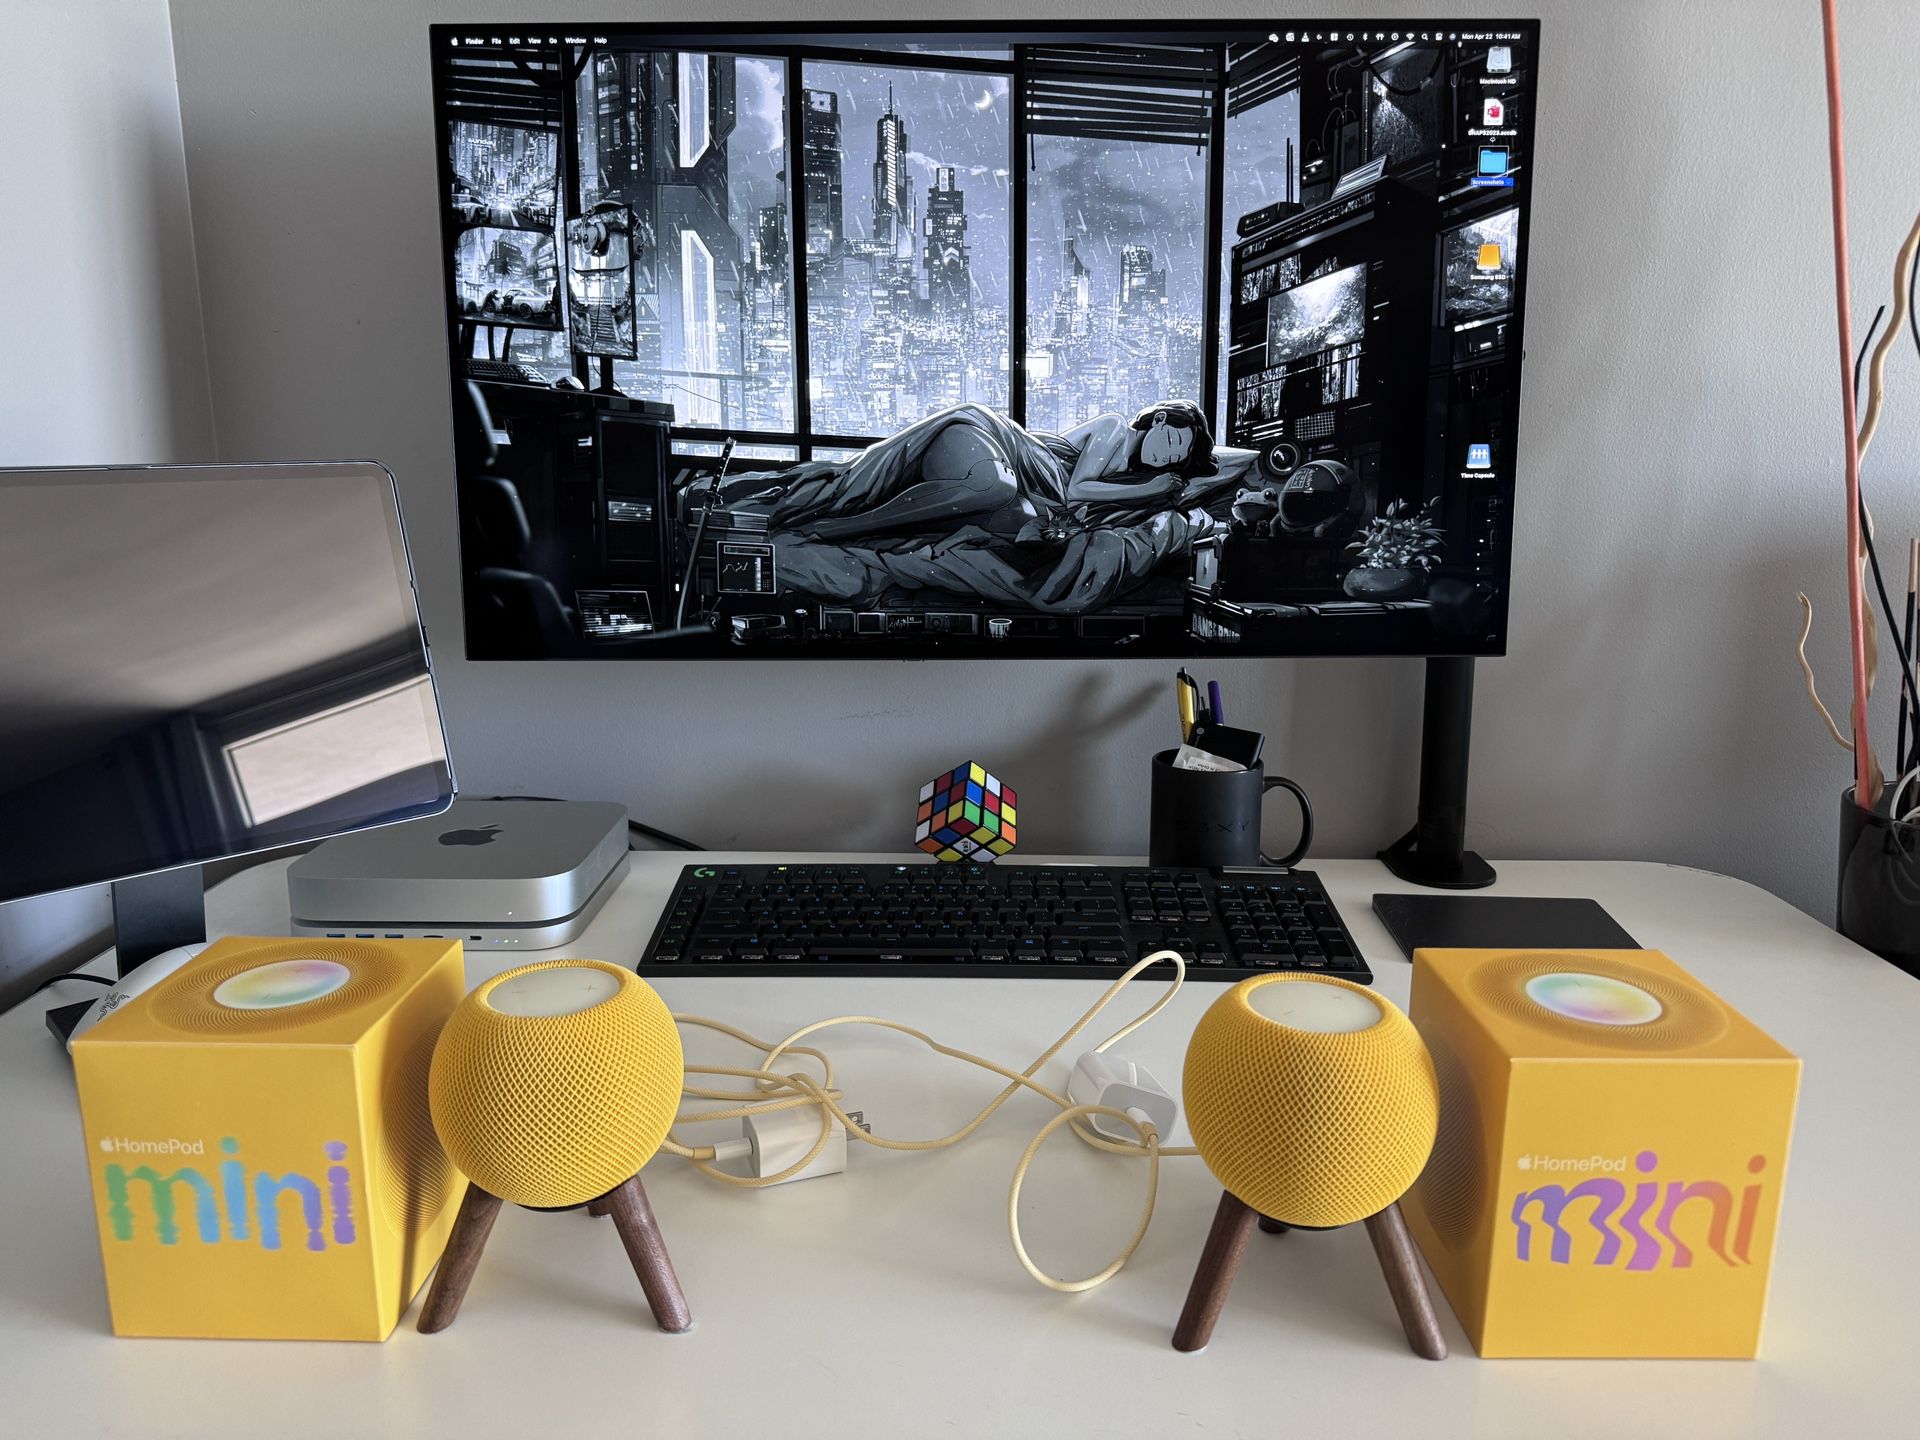 2 yellow Apple Homepod Minis with real wood stands